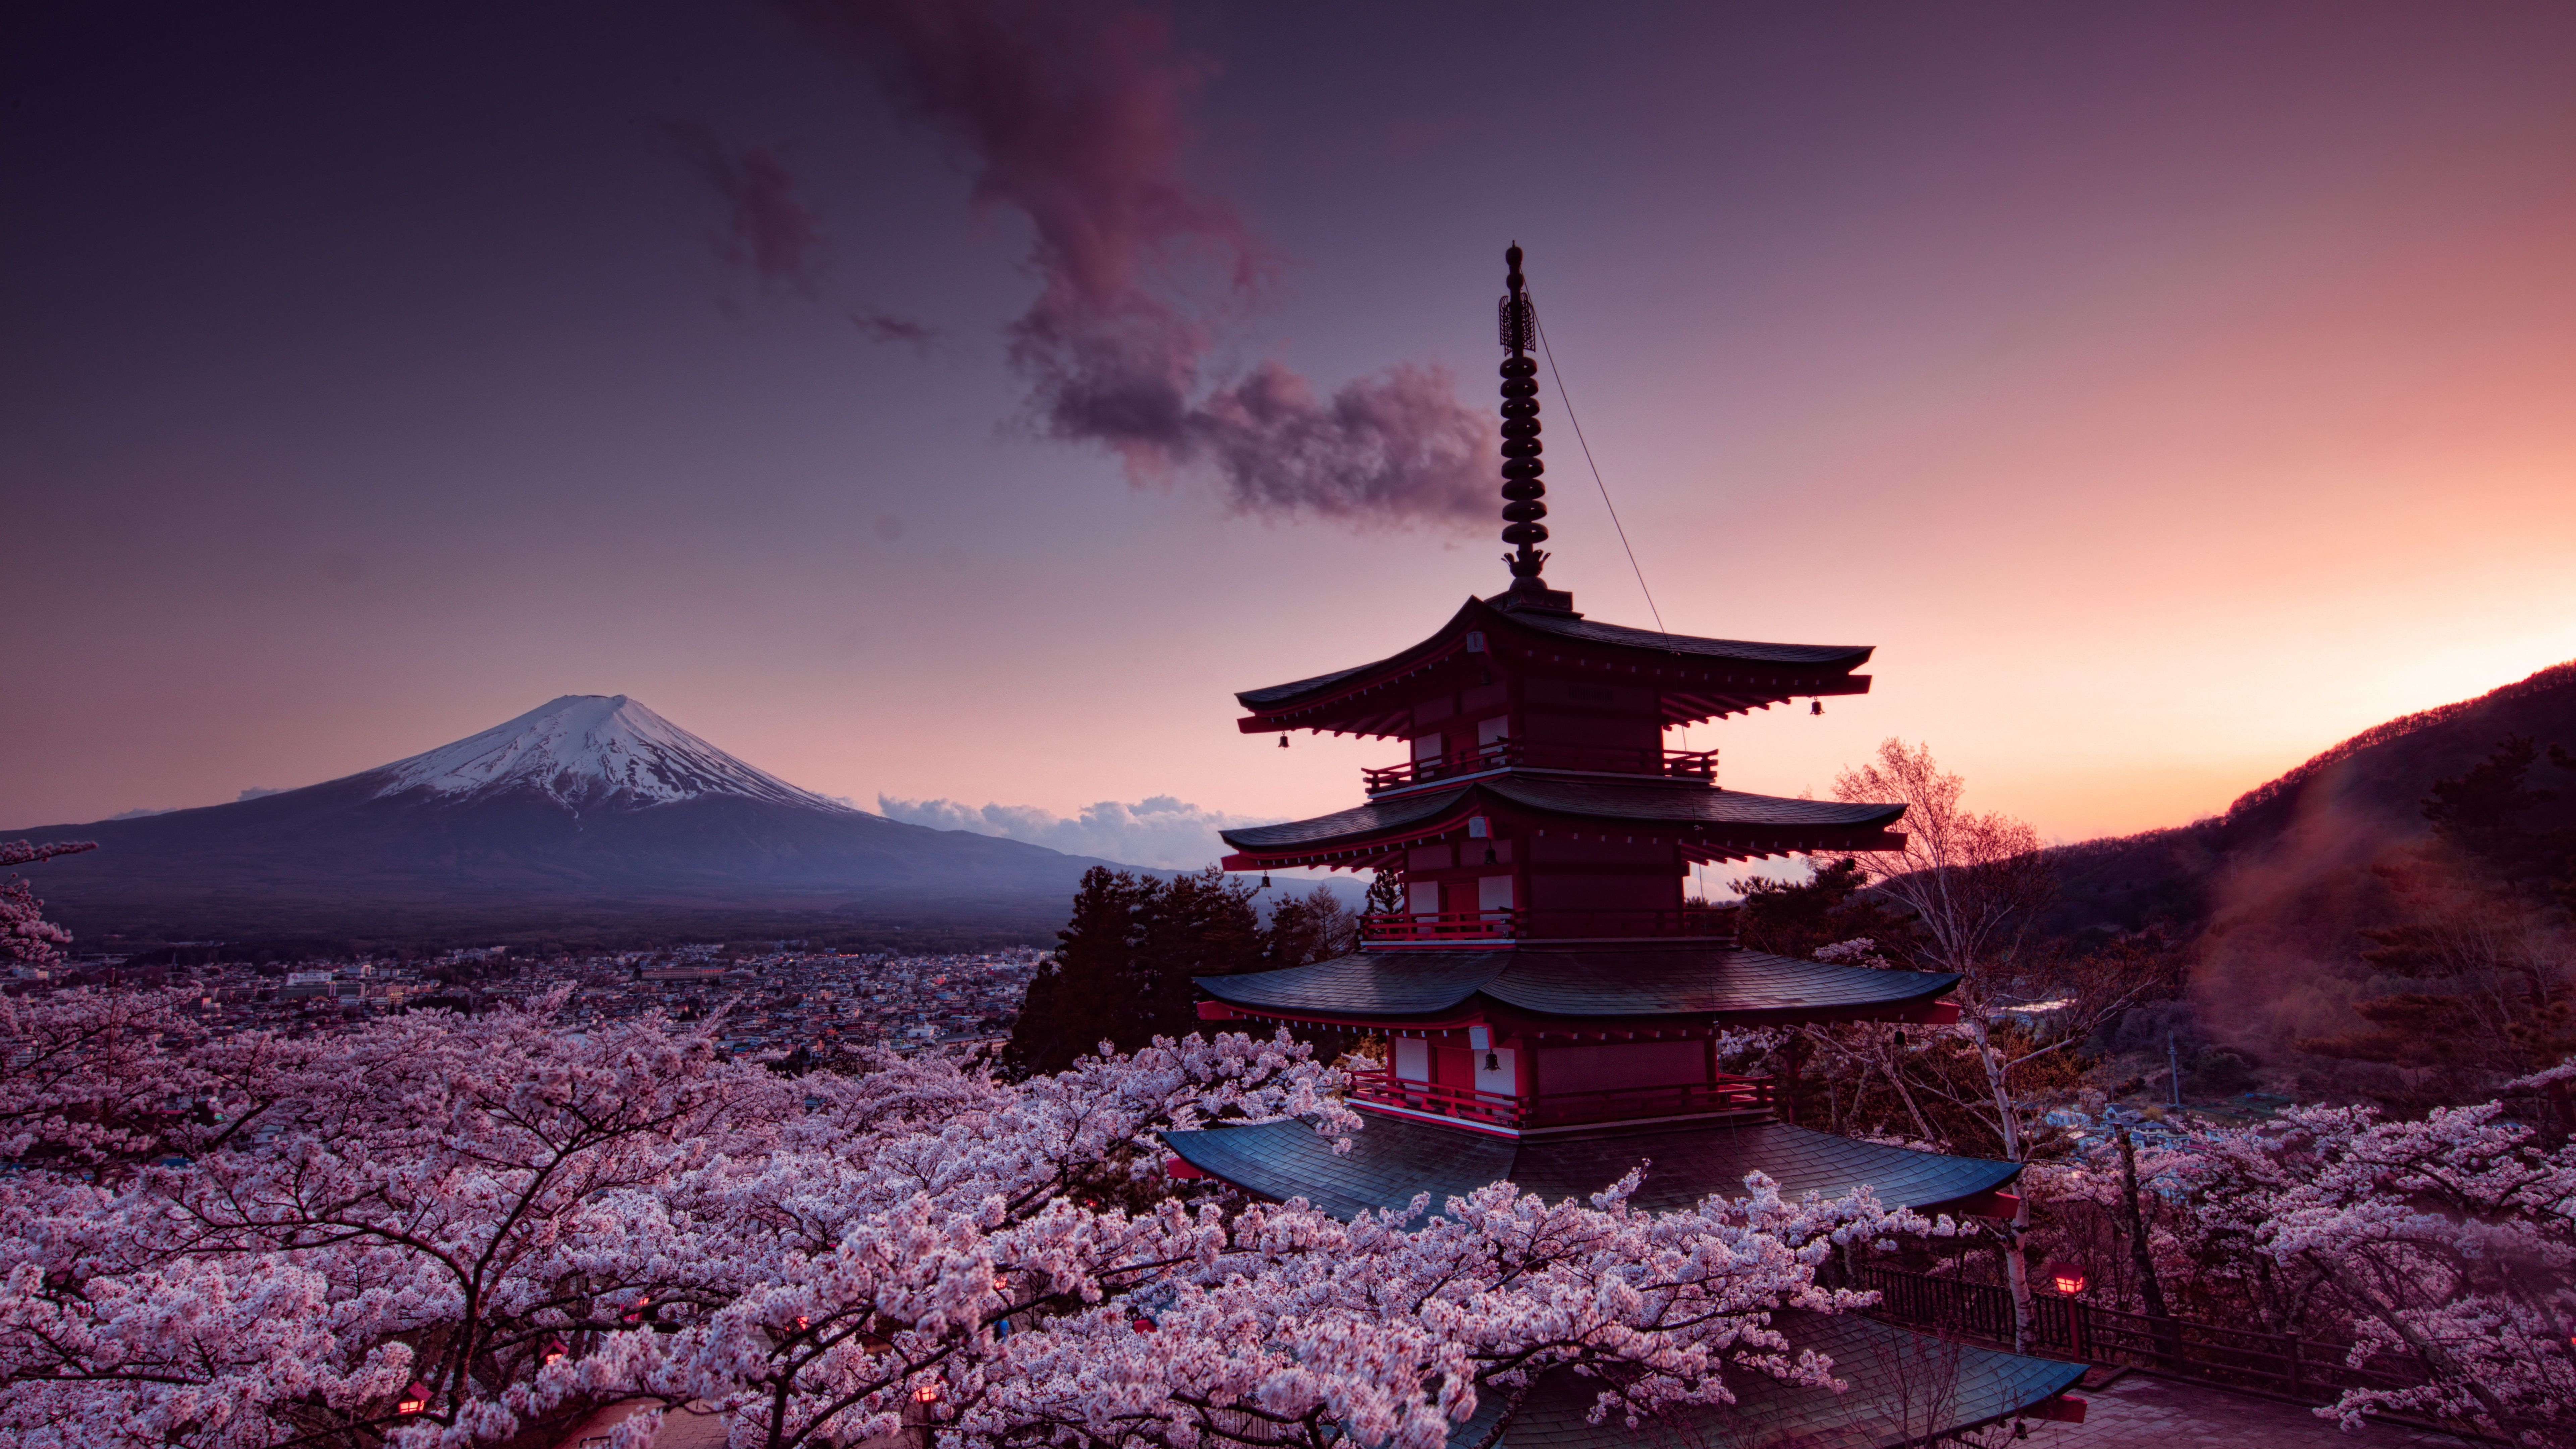 Churei Tower Mount Fuji In Japan 8k 8k HD 4k Wallpaper, Image, Background, Photo and Picture